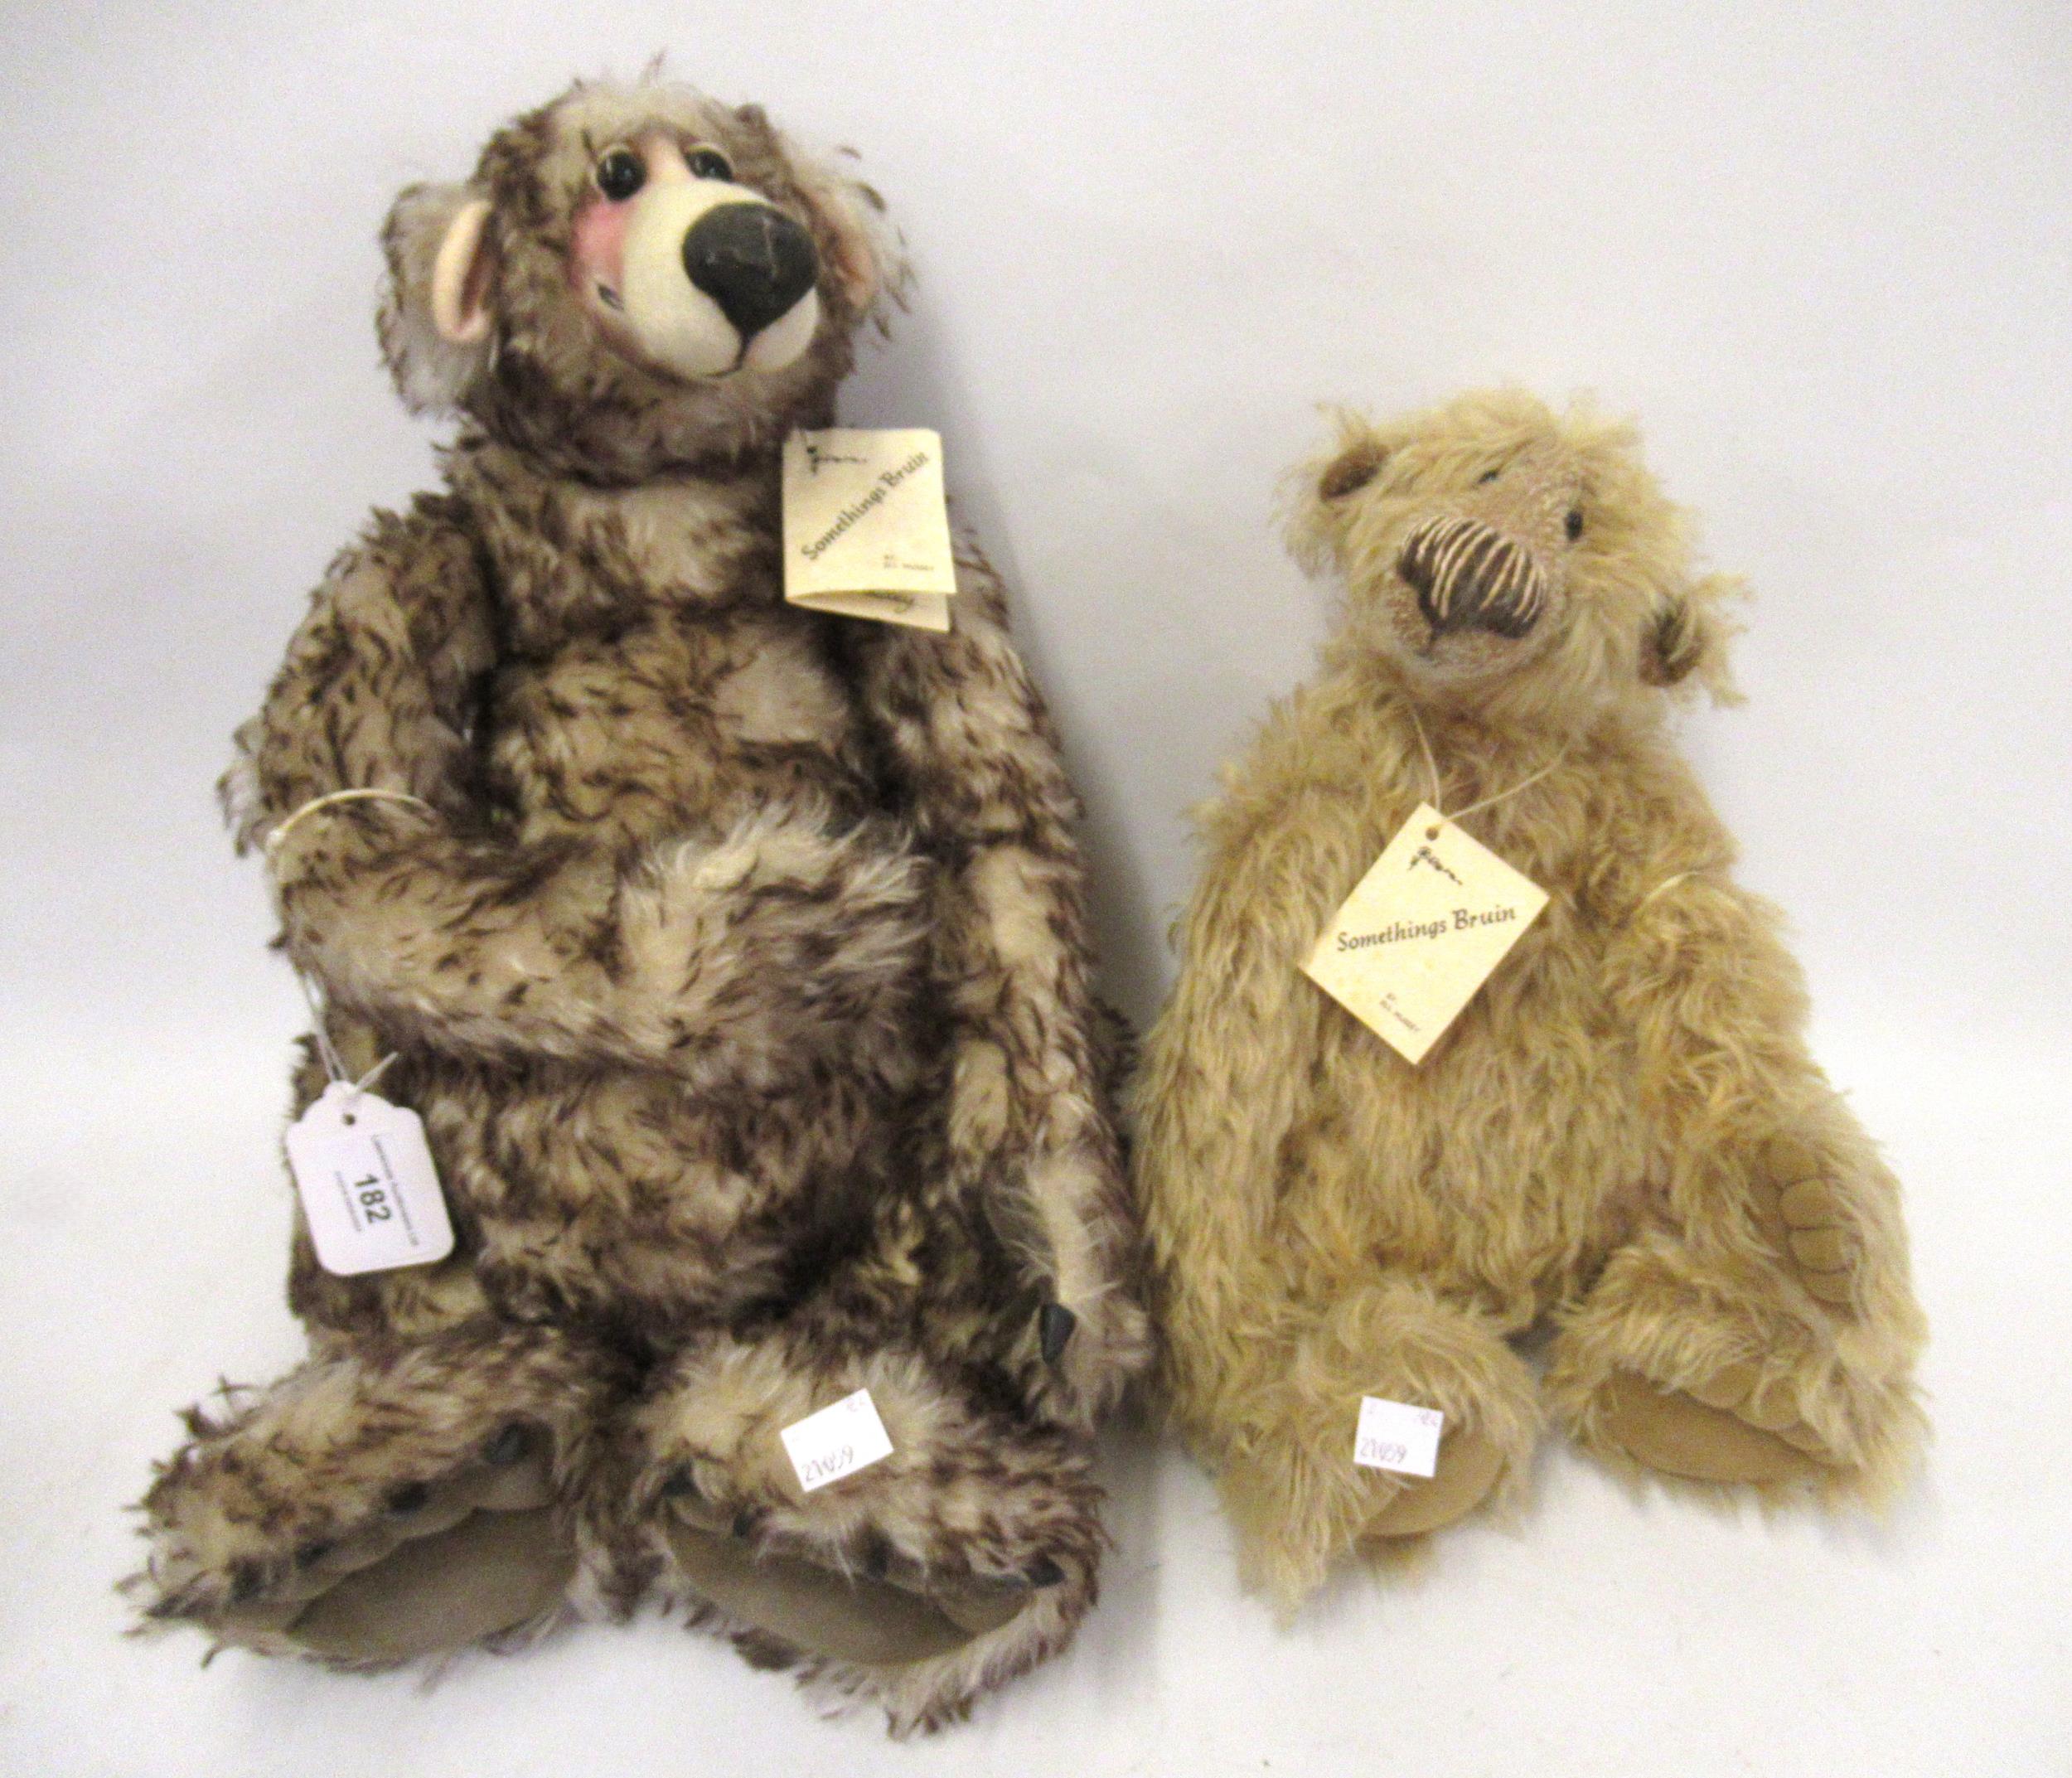 Two modern good quality articulated plush teddy bears by Somethings Bruin by Jill Hussey, one